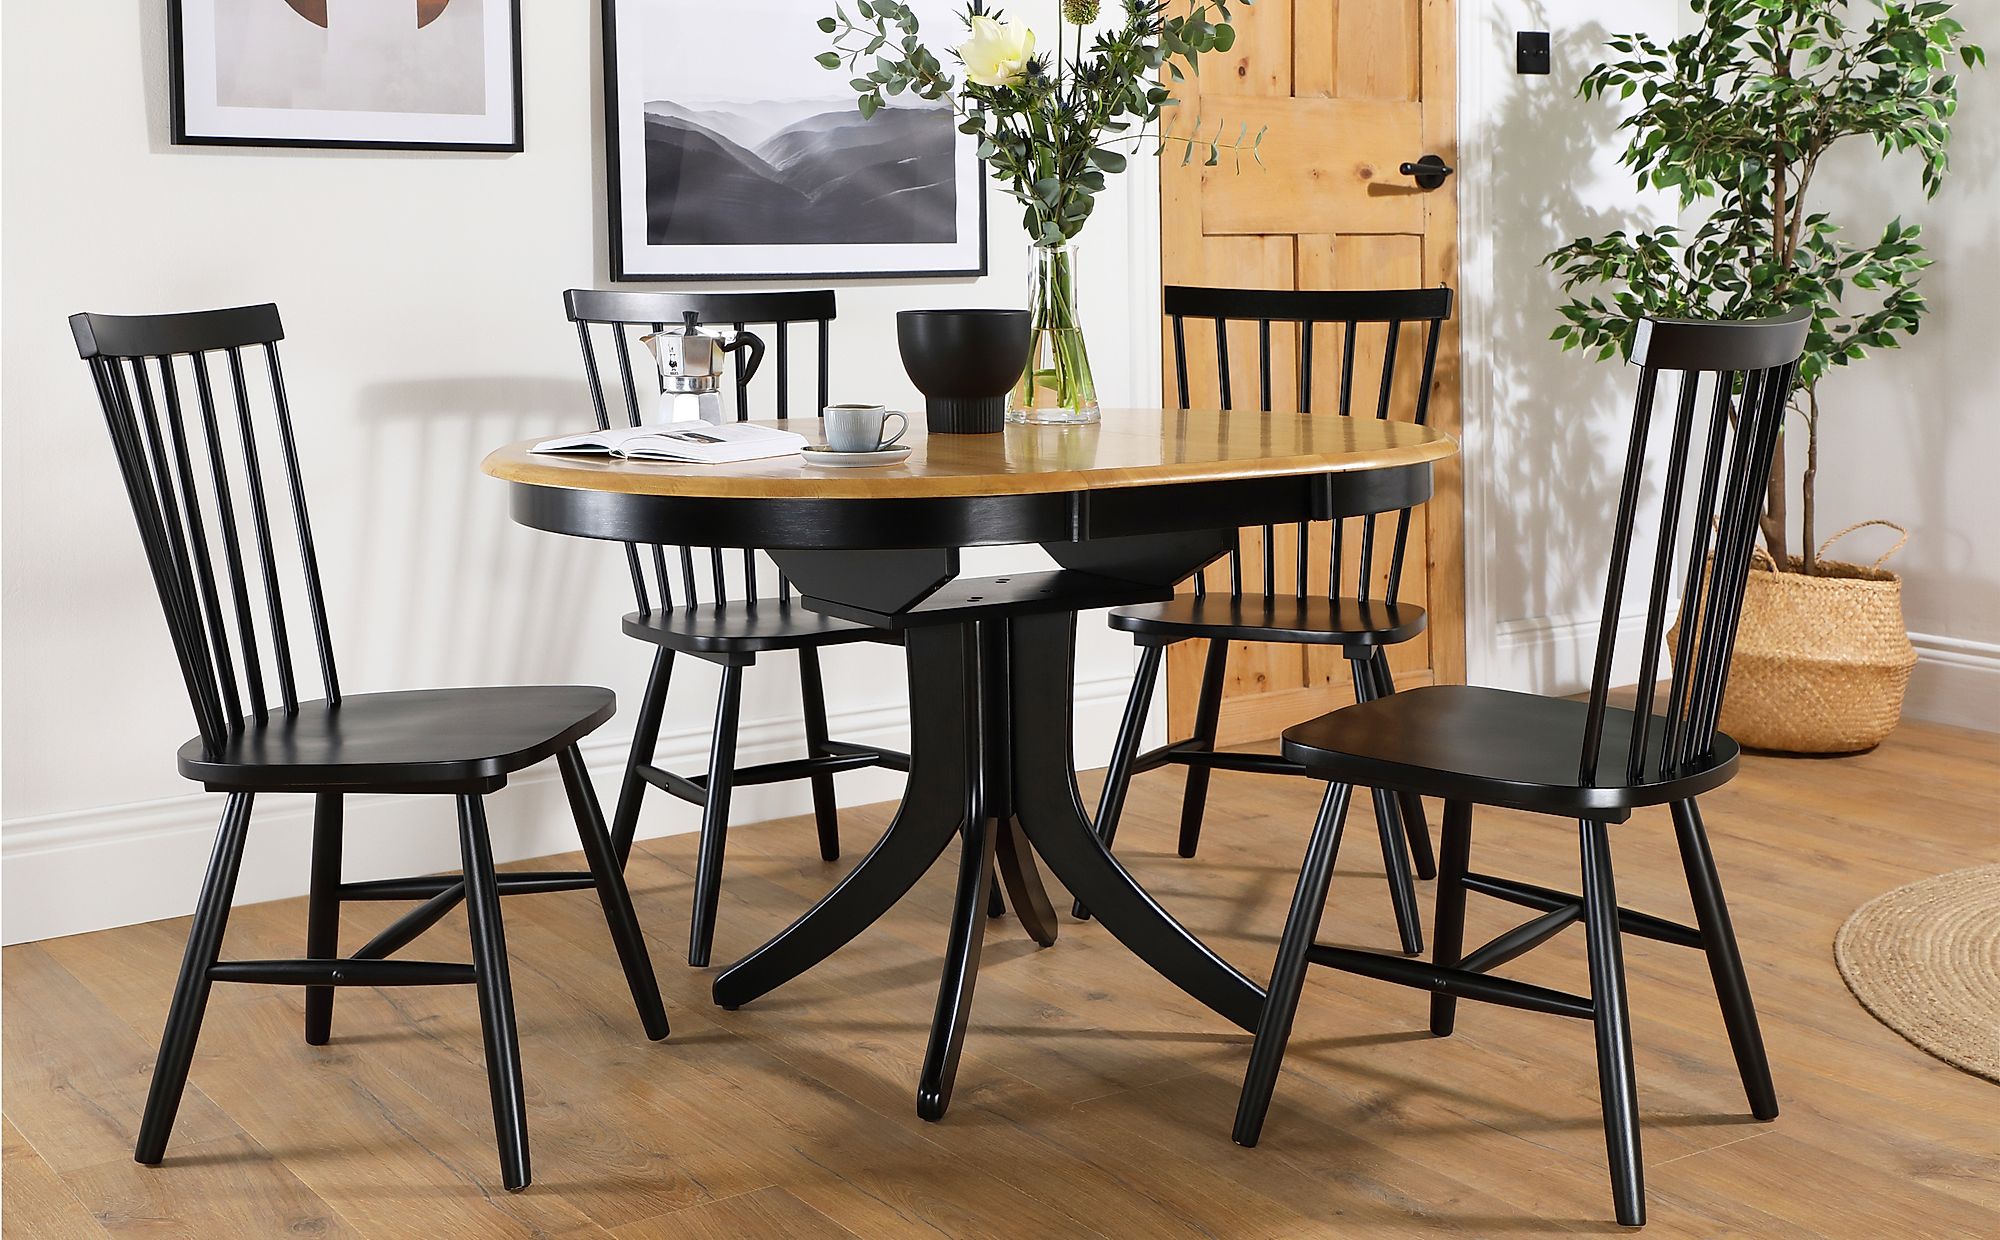 black and oak kitchen table and chair